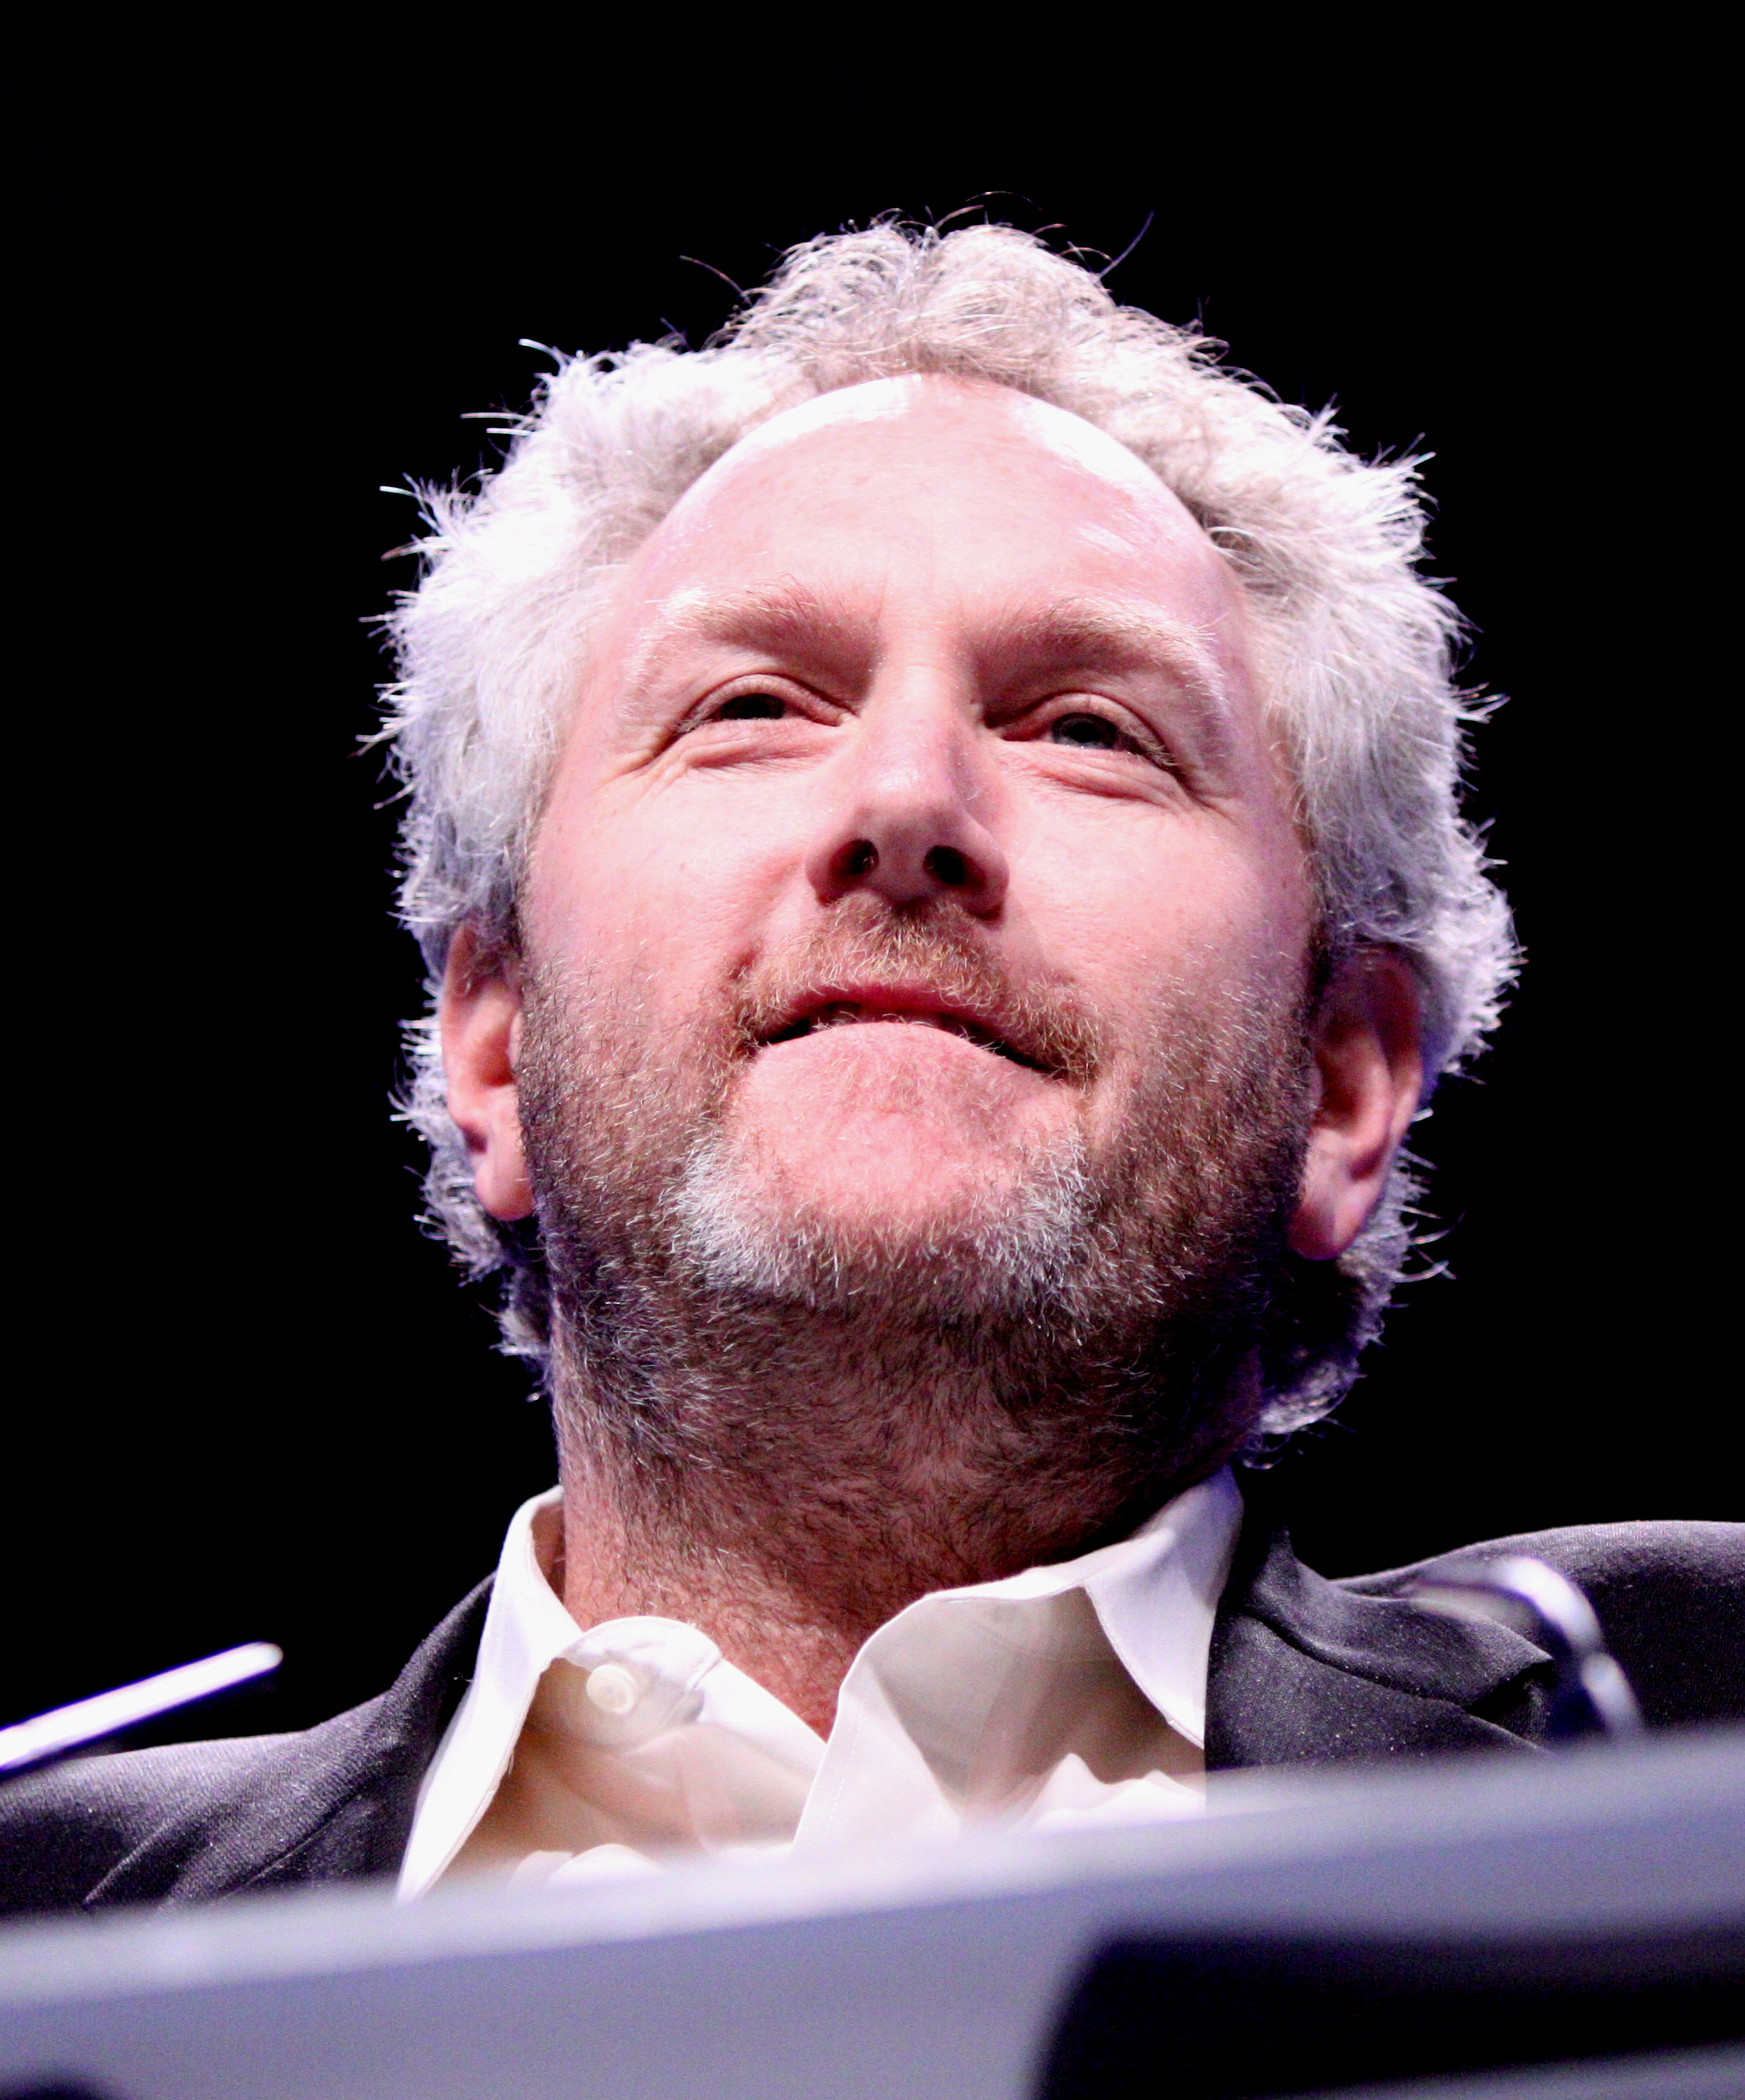 File:ANDREW BREITBART by Gage Skidmore.jpg - Wikipedia, the free ...